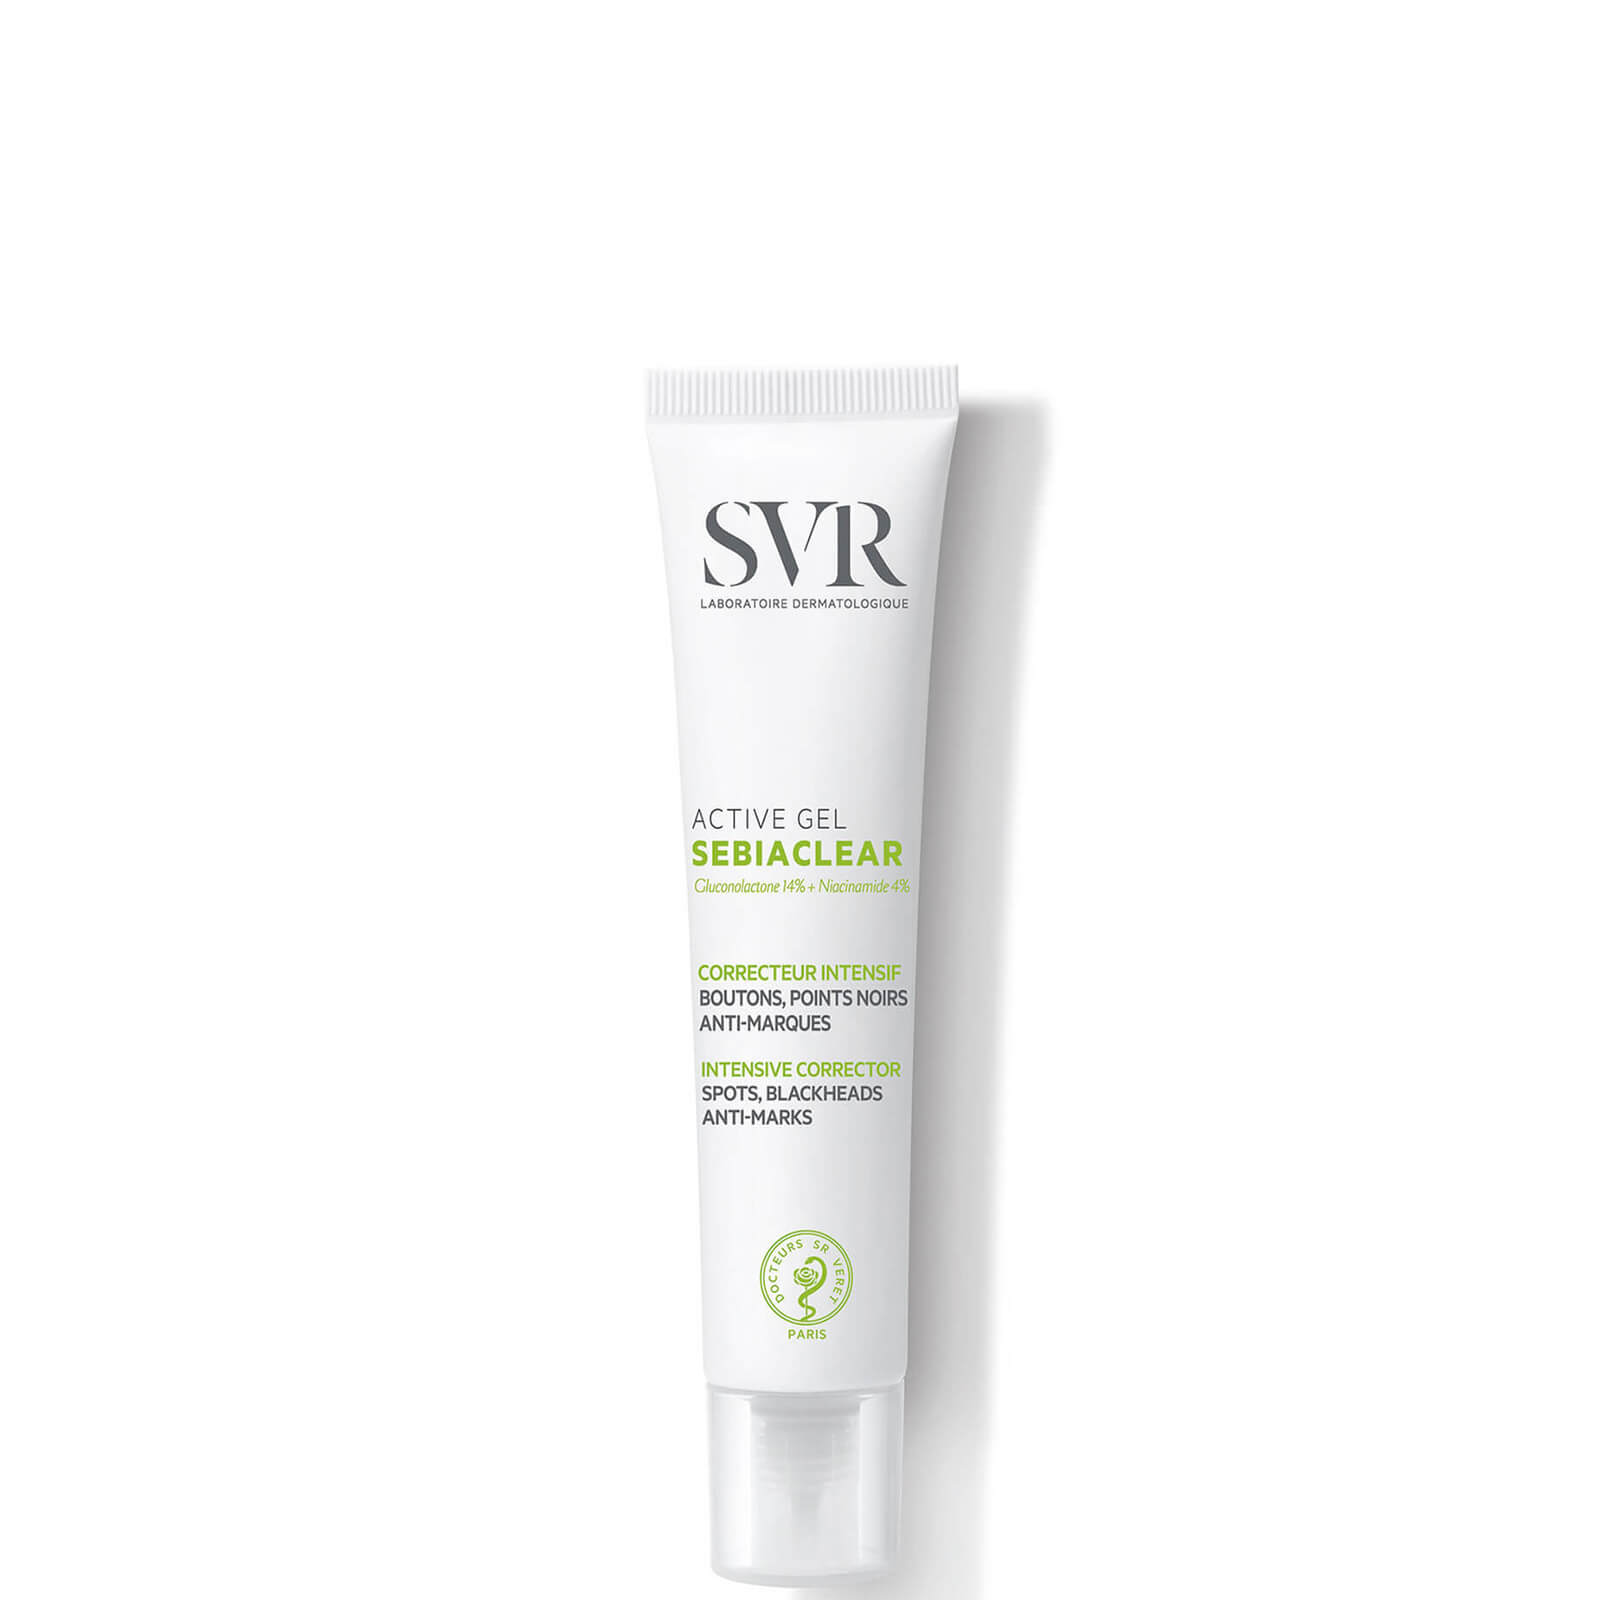 Image of SVR Sebiaclear Active Acne and Spot Treatment Gel-Cream 40ml